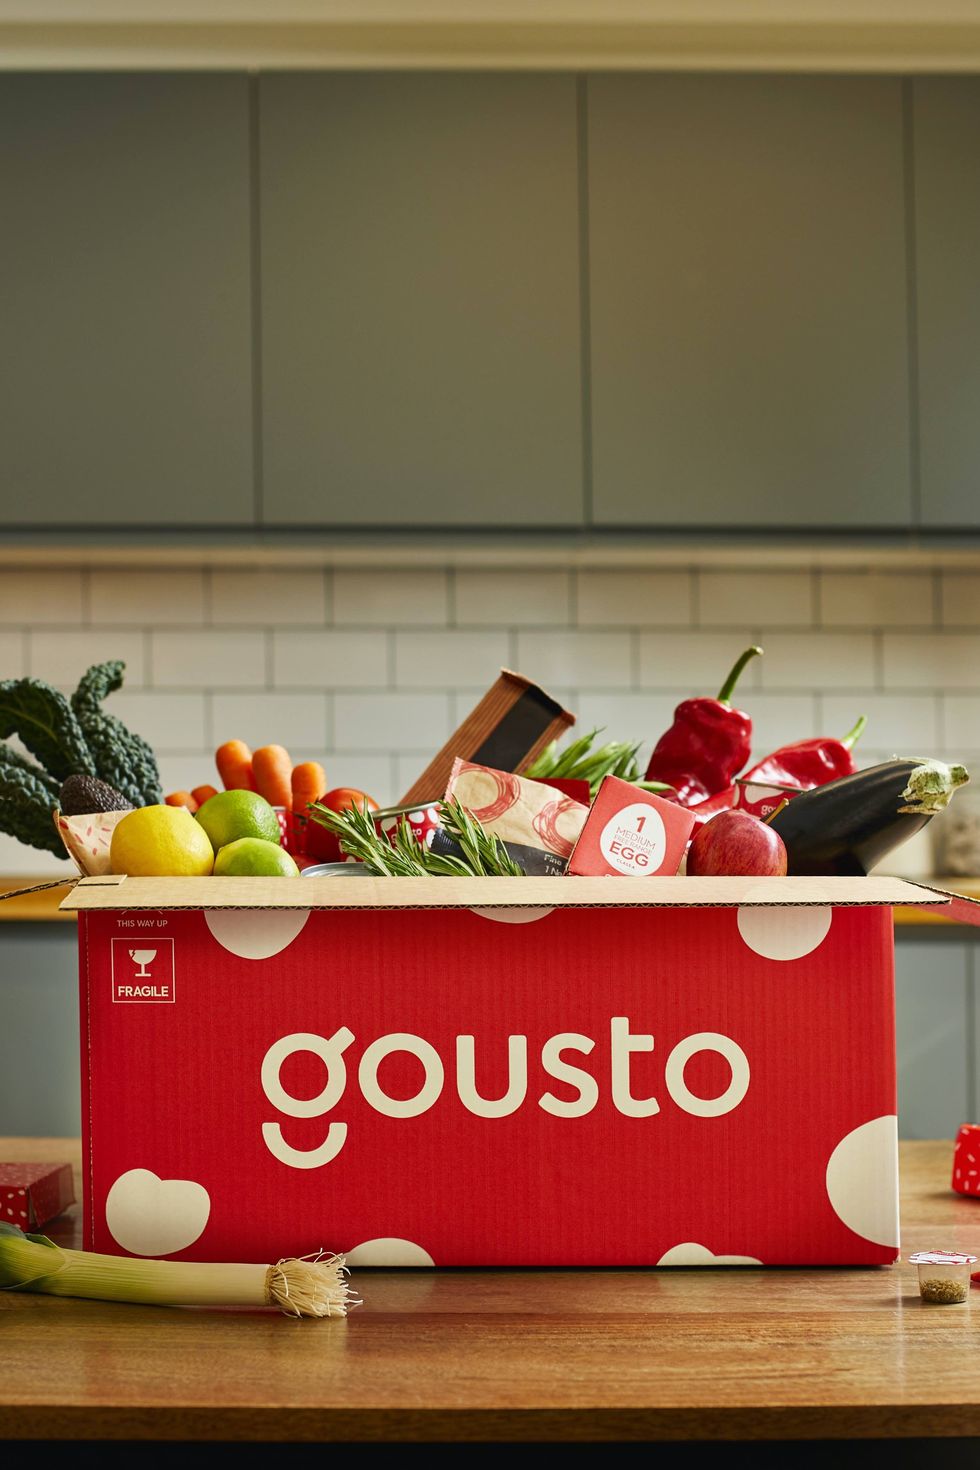 Gousto Vegetarian and Plant-Based Box, from £2.51 per serving